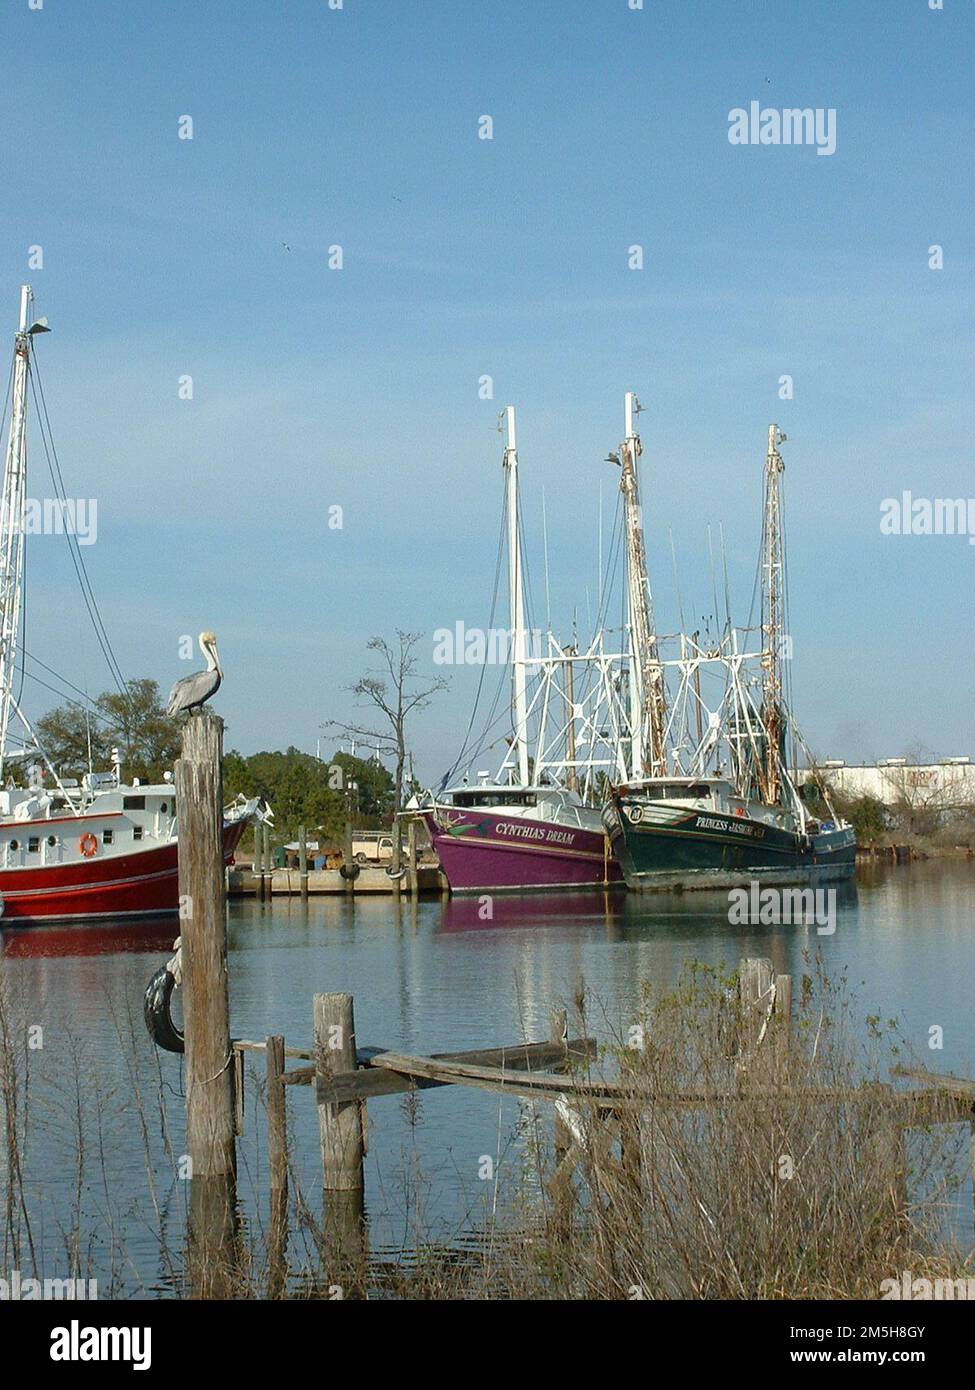 Alabama's Coastal Connection - Shrimp Boats in Bayou La Batre. Bayou La Batre provides safe harbor for the boats of its shrimping industry as well as coastal birds, such as the pelican that rests on a wooden pillar amongst the boats. Location: Alabama (30.404° N 88.253° W) Stock Photo